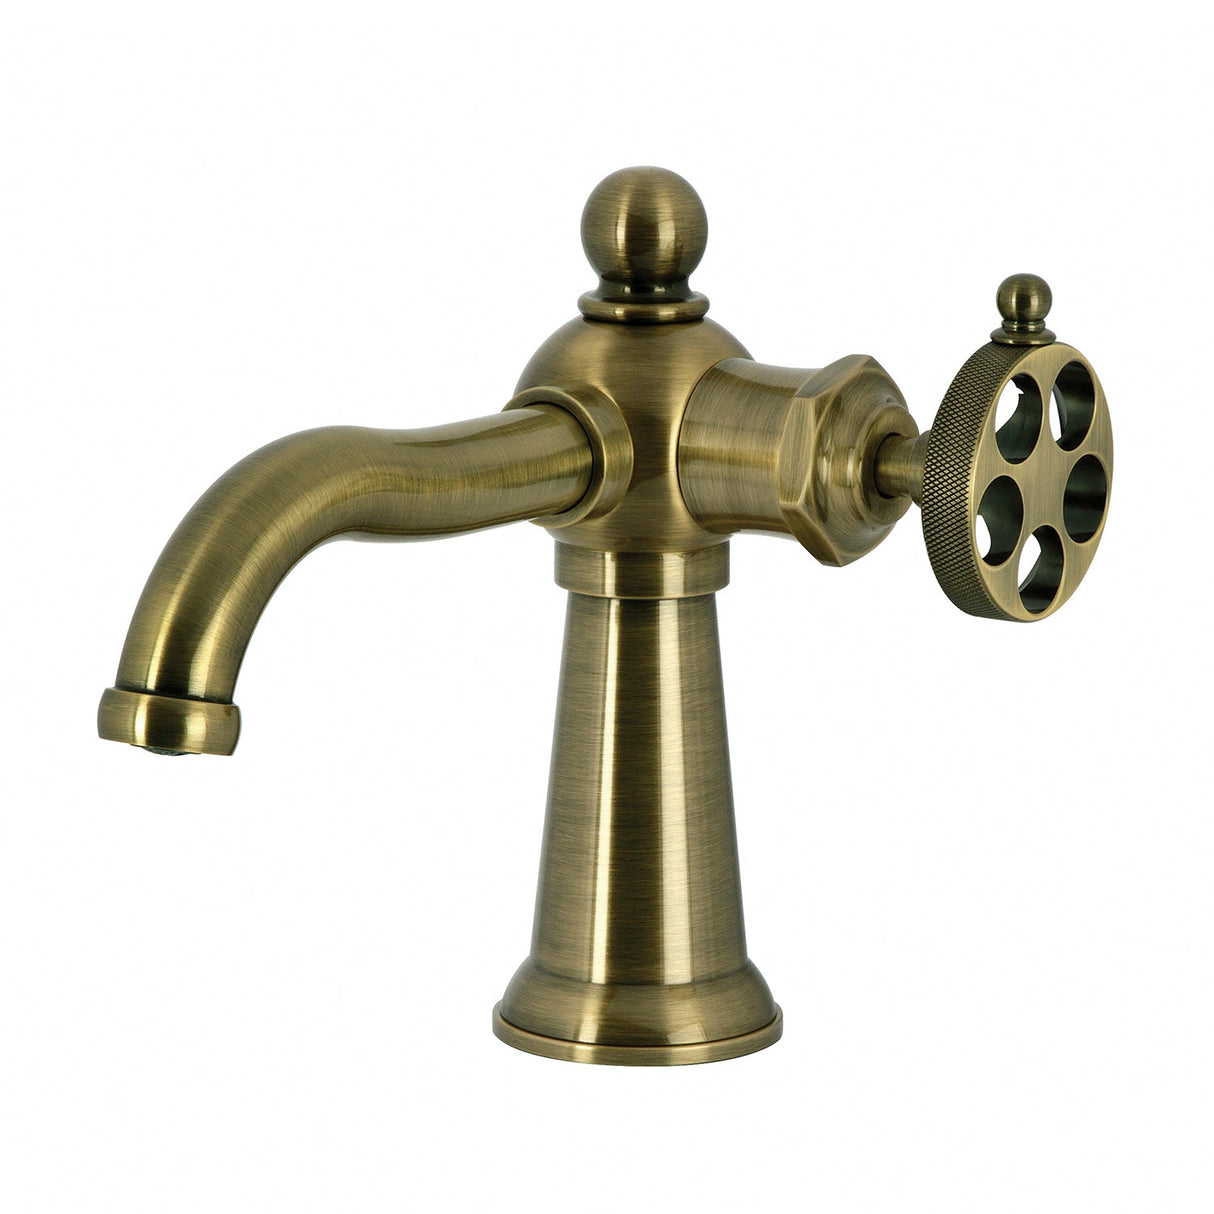 Wendell KS3543RKZ Single-Handle 1-Hole Deck Mount Bathroom Faucet with Knurled Handle and Push Pop-Up Drain, Antique Brass